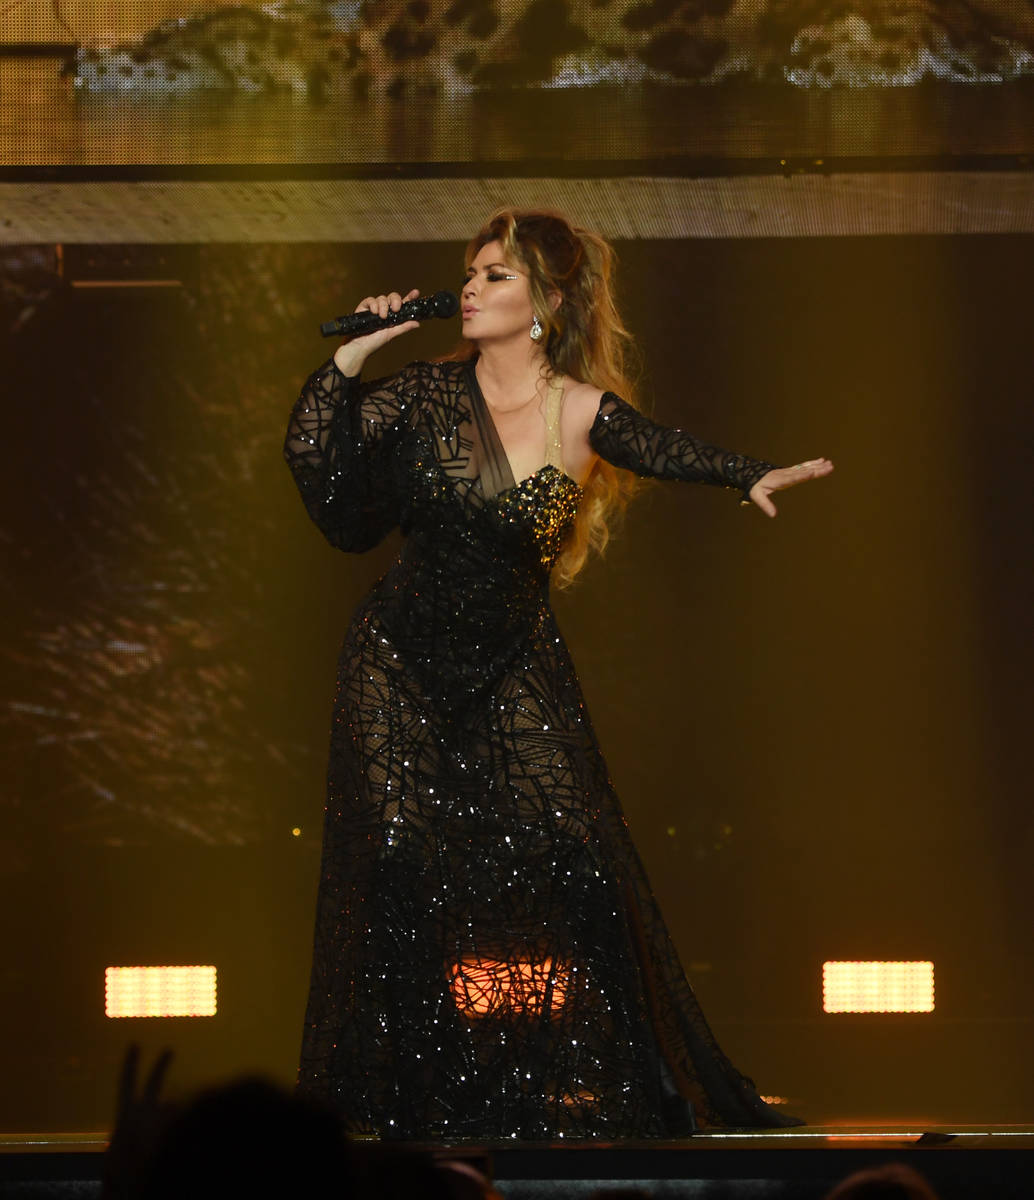 Shania Twain performs on opening night of her "Let's Go" residency at Zappos Theater at Planet ...